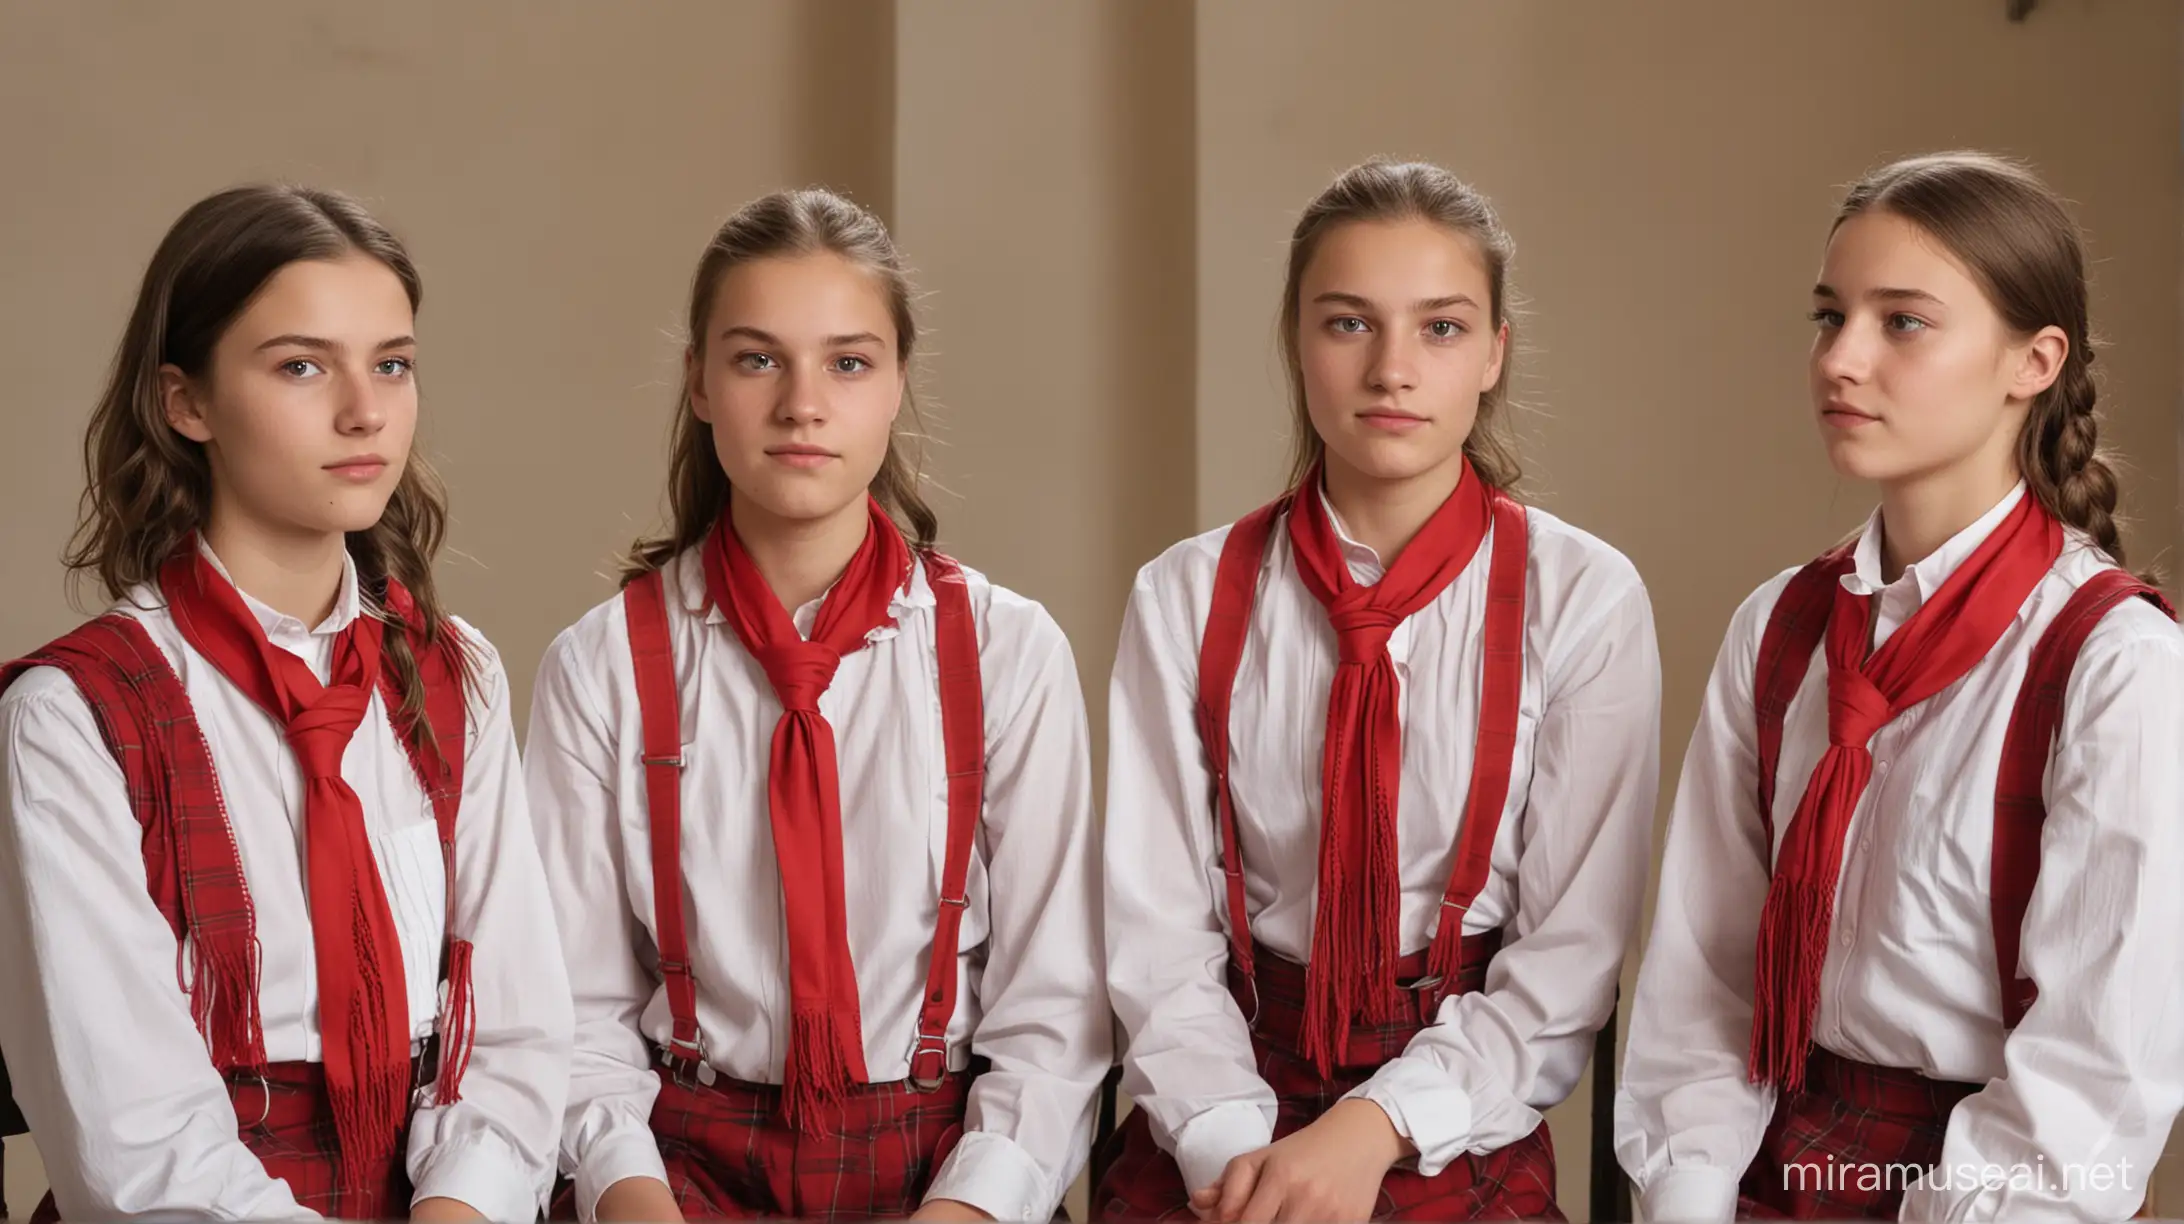 Three 14 old year teenagers gathered together and seem engaged and focused on the task, male and female, european faces, all dressed similarly, wearing red neckerchiefs and white shirts, sitting chairs, the scene conveys a sense of unity and teamwork among the participants, the scene is set indoors.